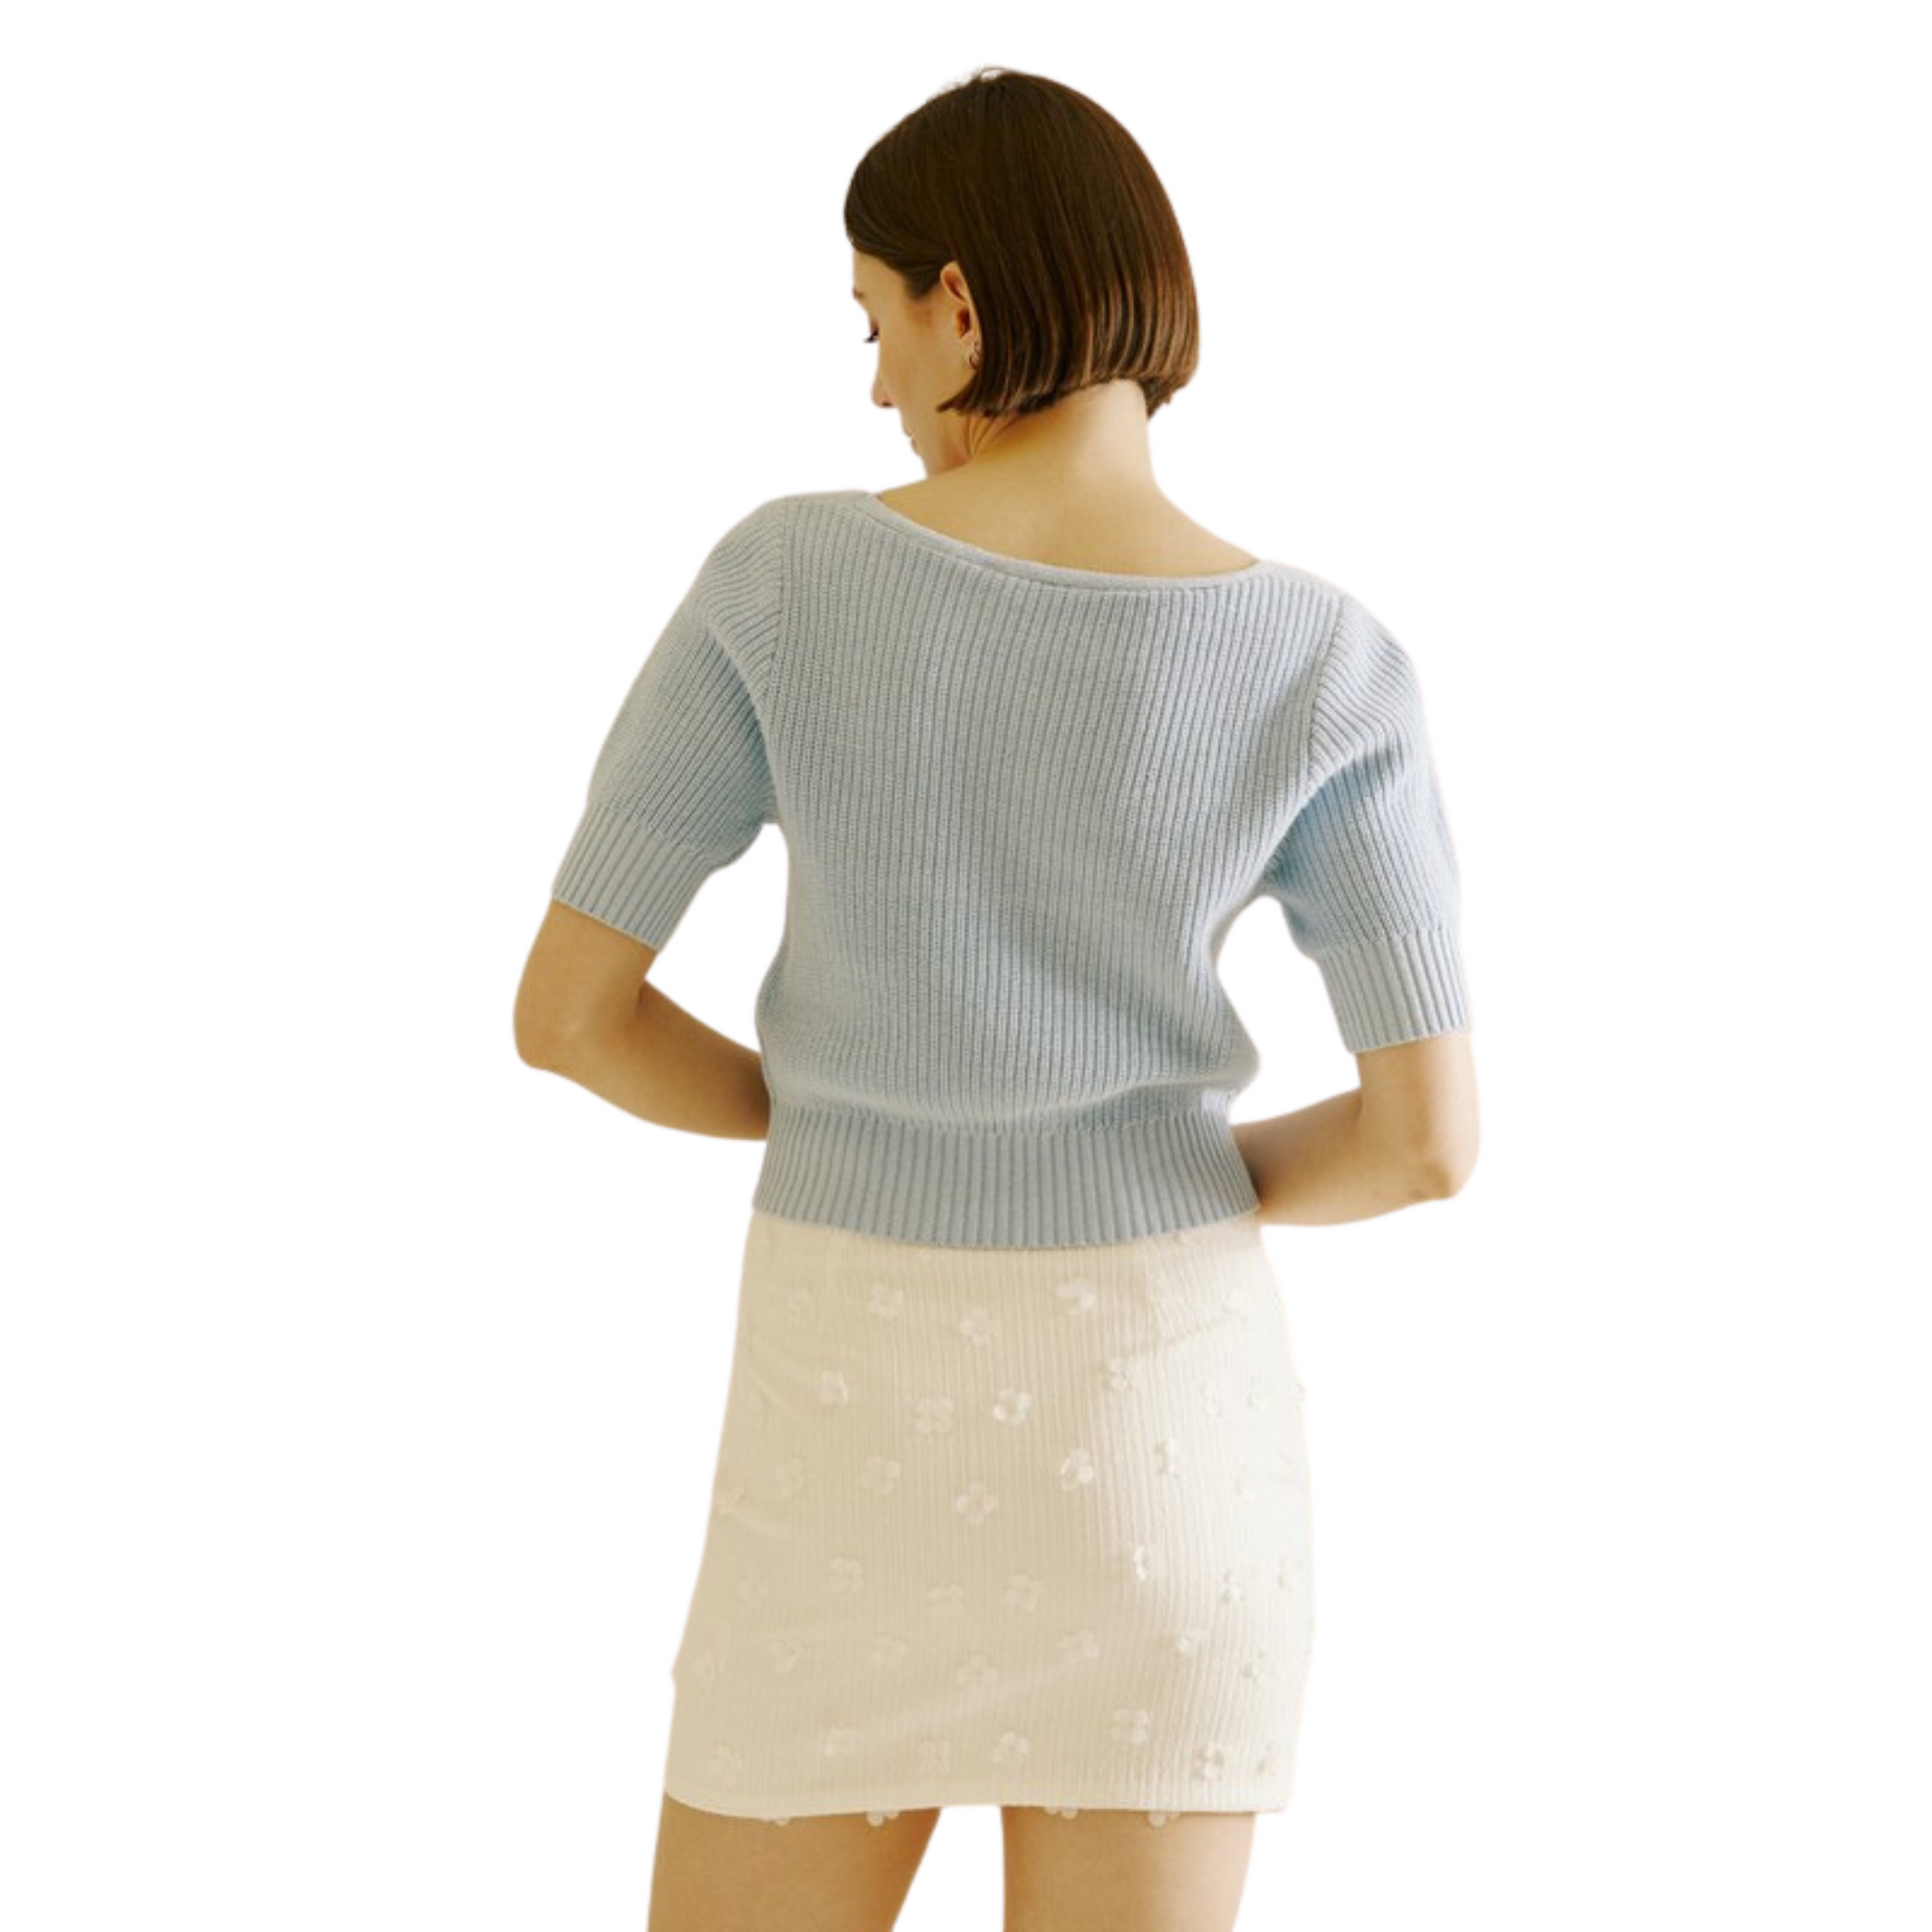 This ribbed knit cropped top is perfect for a classic look. With a square to scooped neckline, 3/4 fitted sleeves, and a semi-fitted body, this top is timeless and comfortable. Thick ribbed cuffs on the sleeves and hem add extra durability and style.